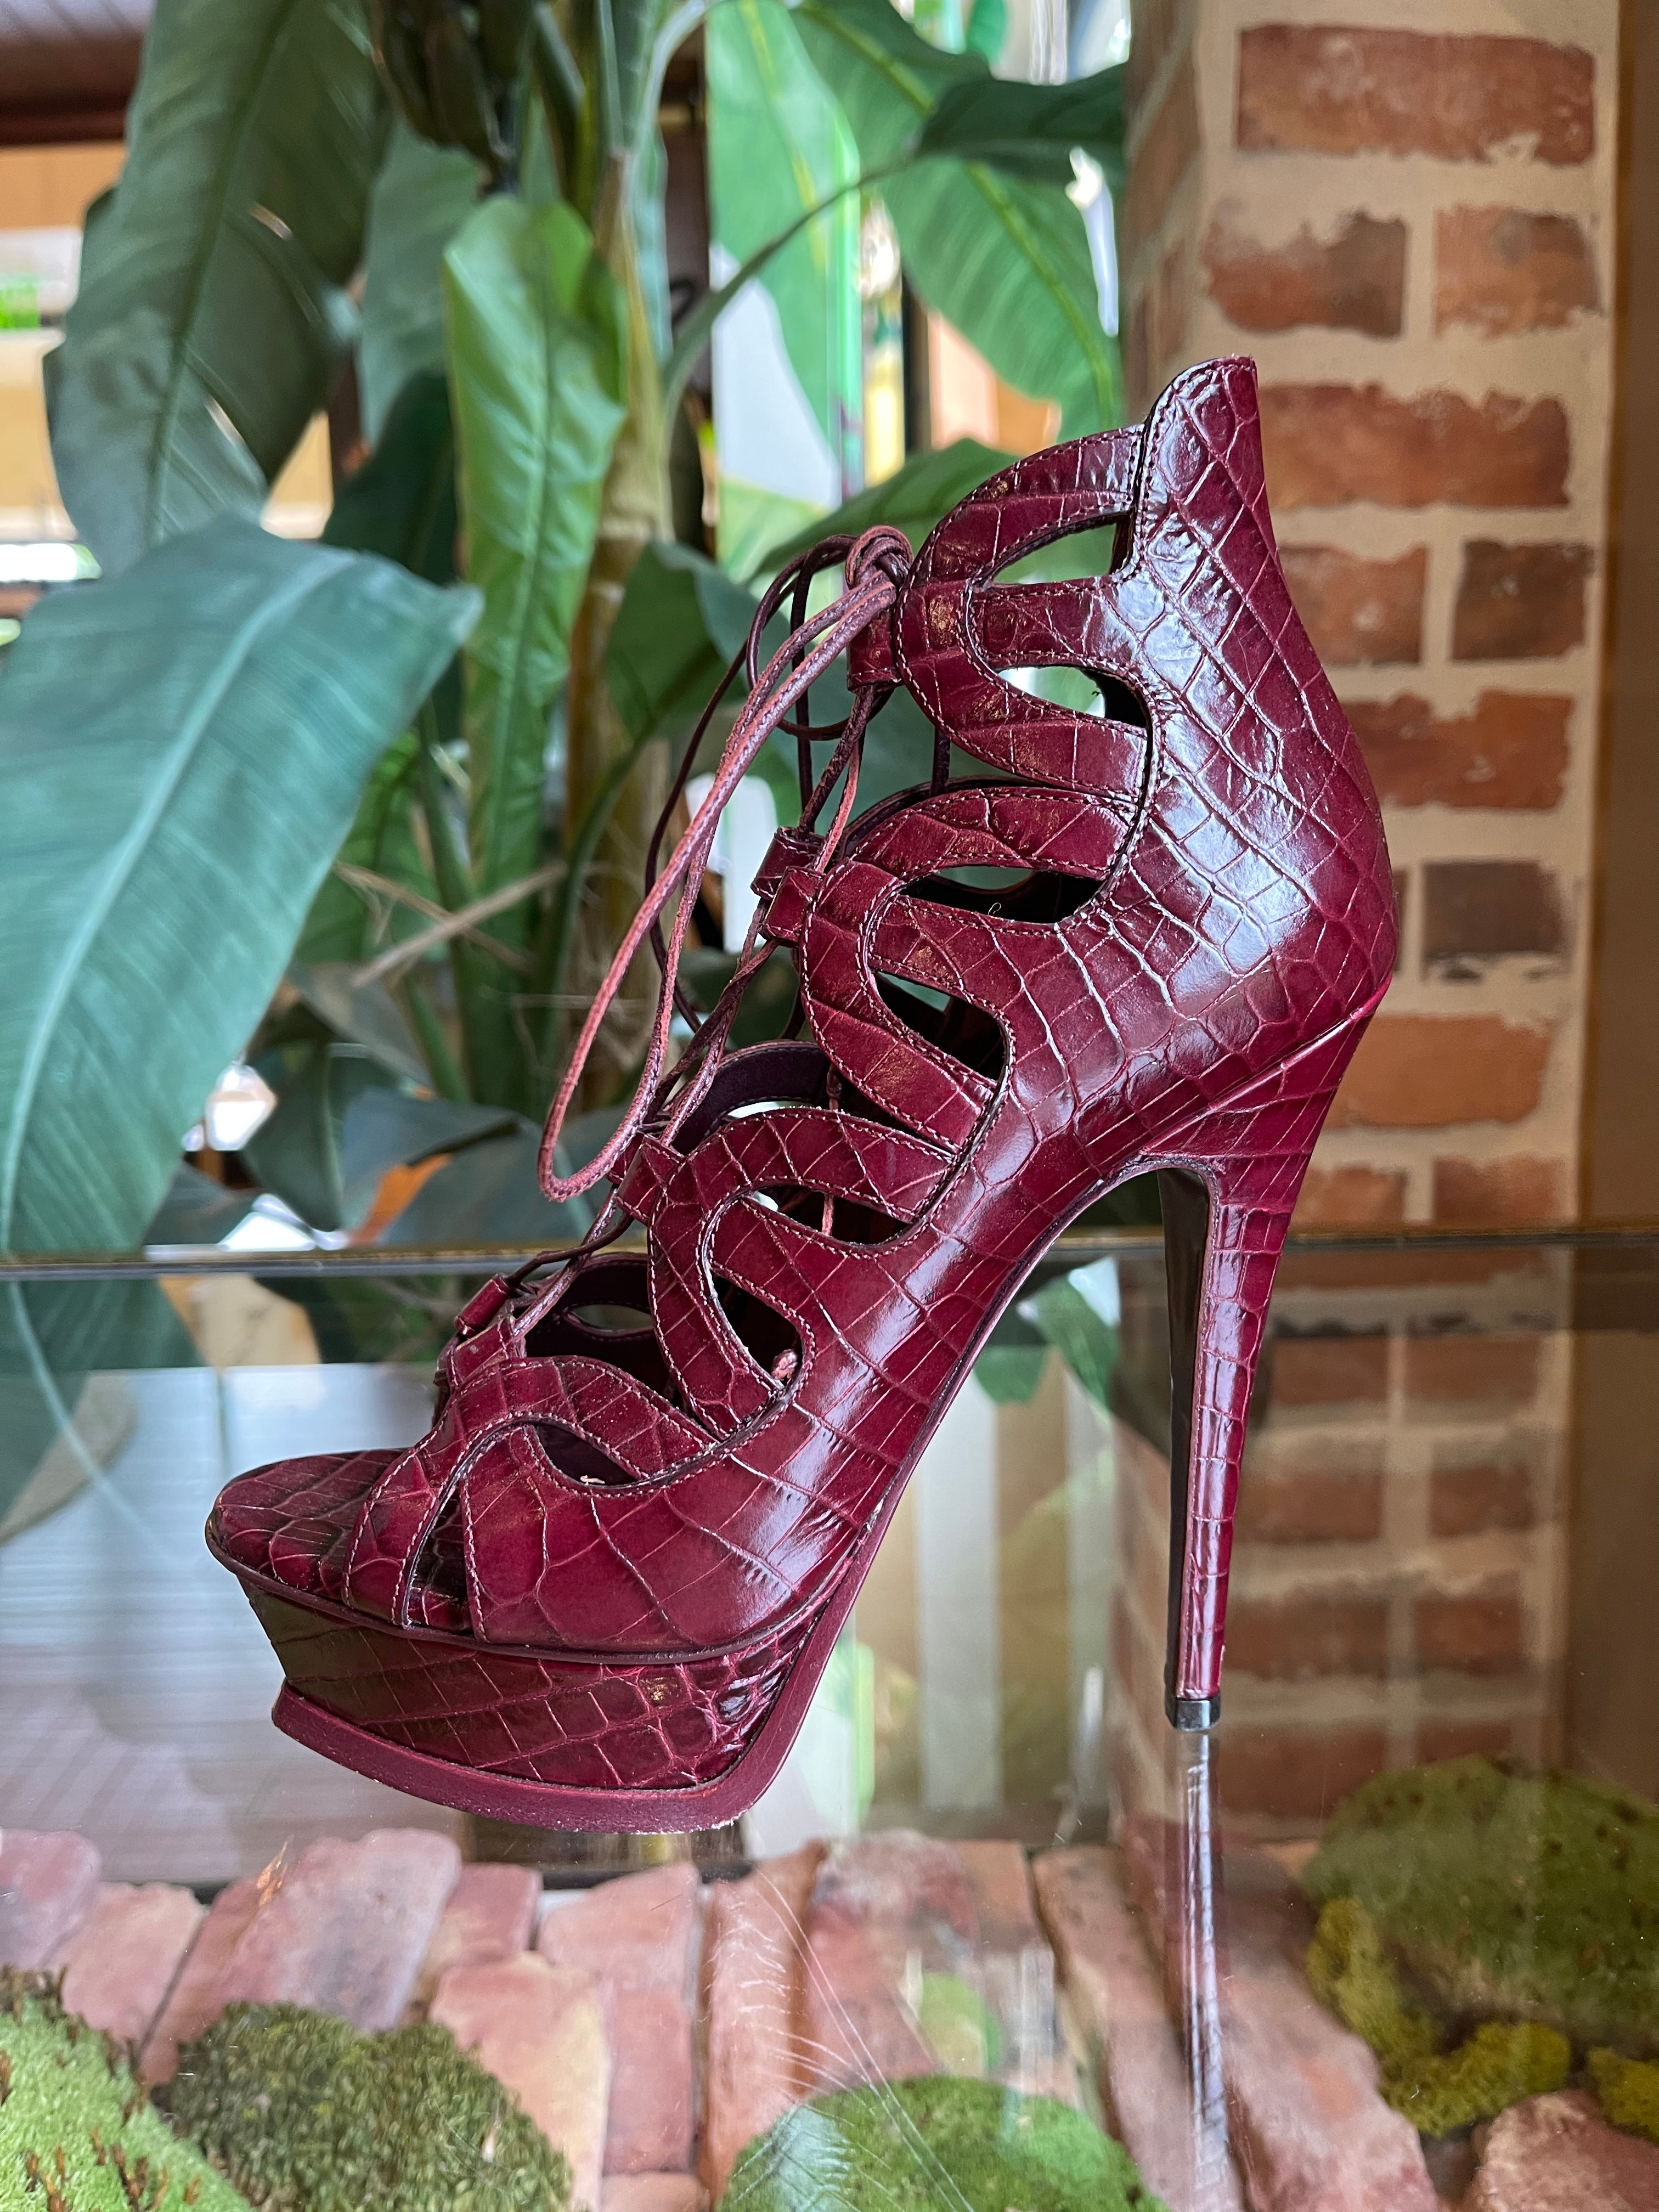 YVES SAINT LAURENT Tribute Croc Embossed Lace up Heels - The Purse